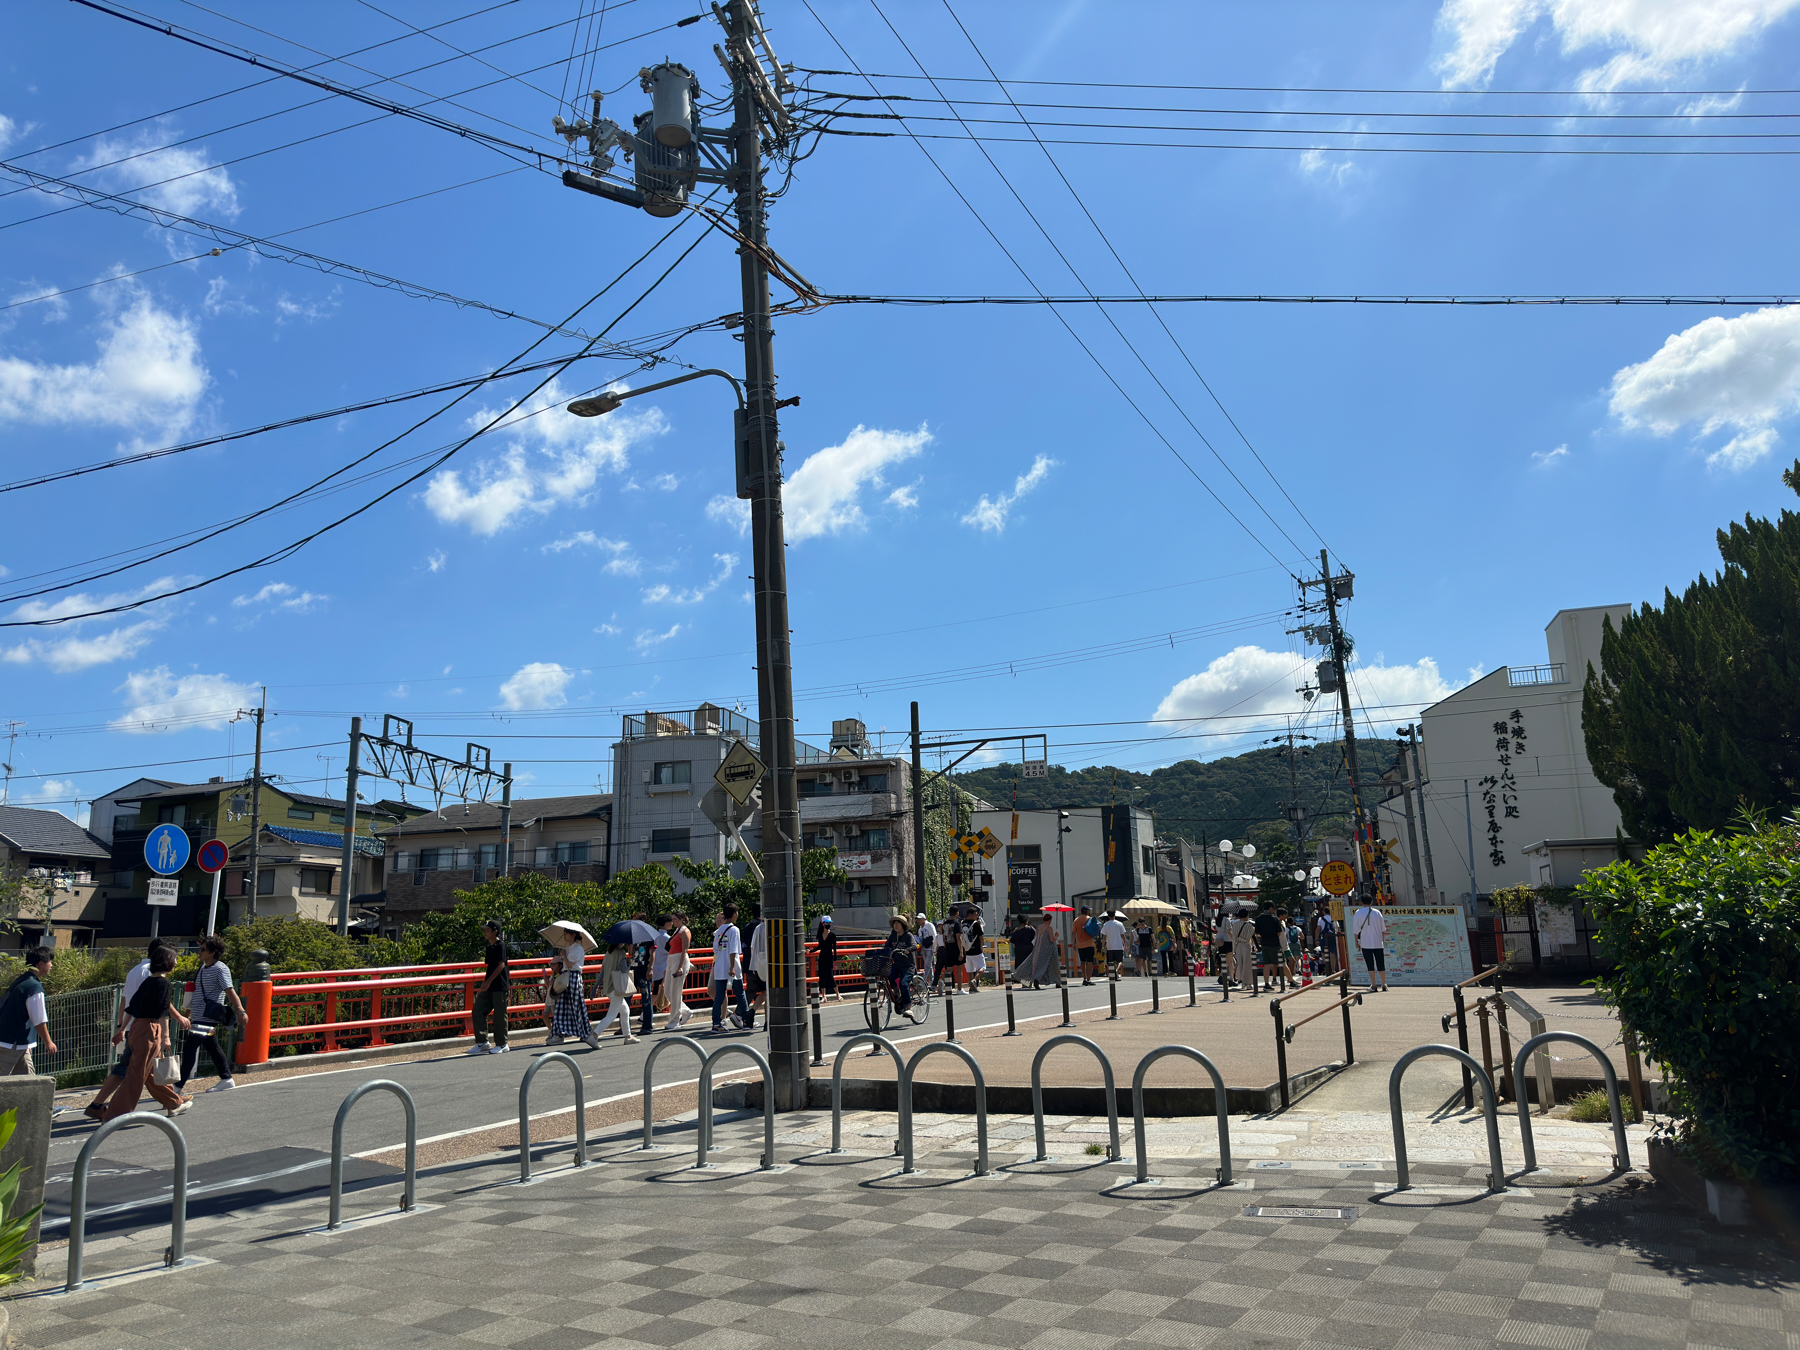 A sunny street scene with people walking near a red bridge, overhead power lines, bicycles racks, and various signage, including Japanese characters. There&rsquo;s a mix of modern buildings and lush greenery in the background.